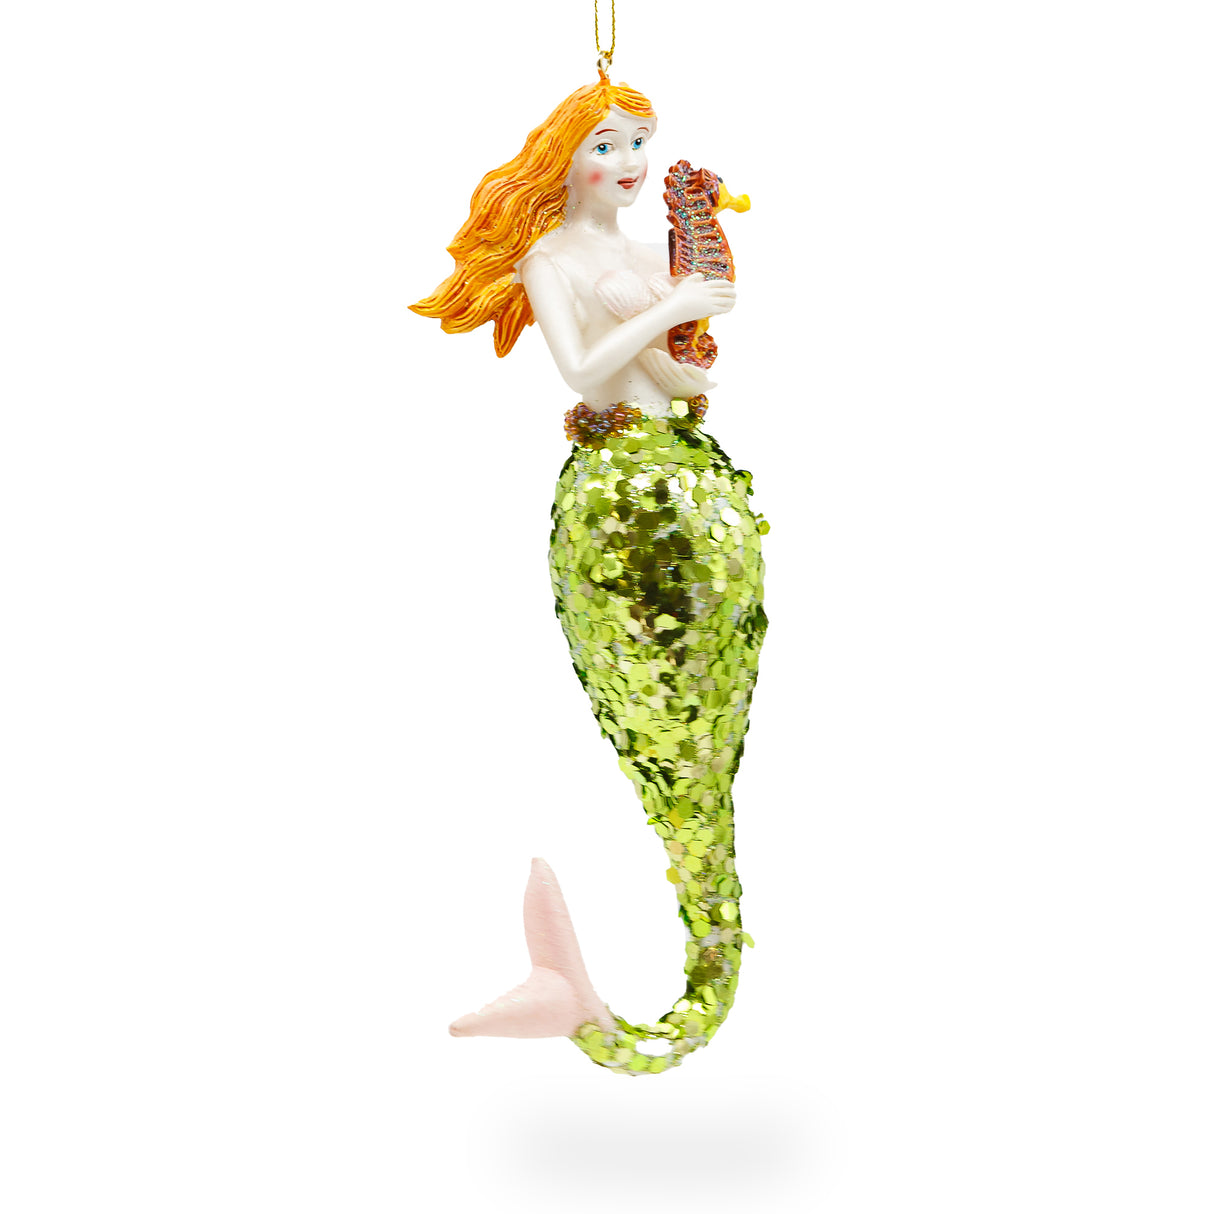 Enchanting Mermaid Holding Sea Horse - Blown Glass Christmas Ornament in Multi color,  shape